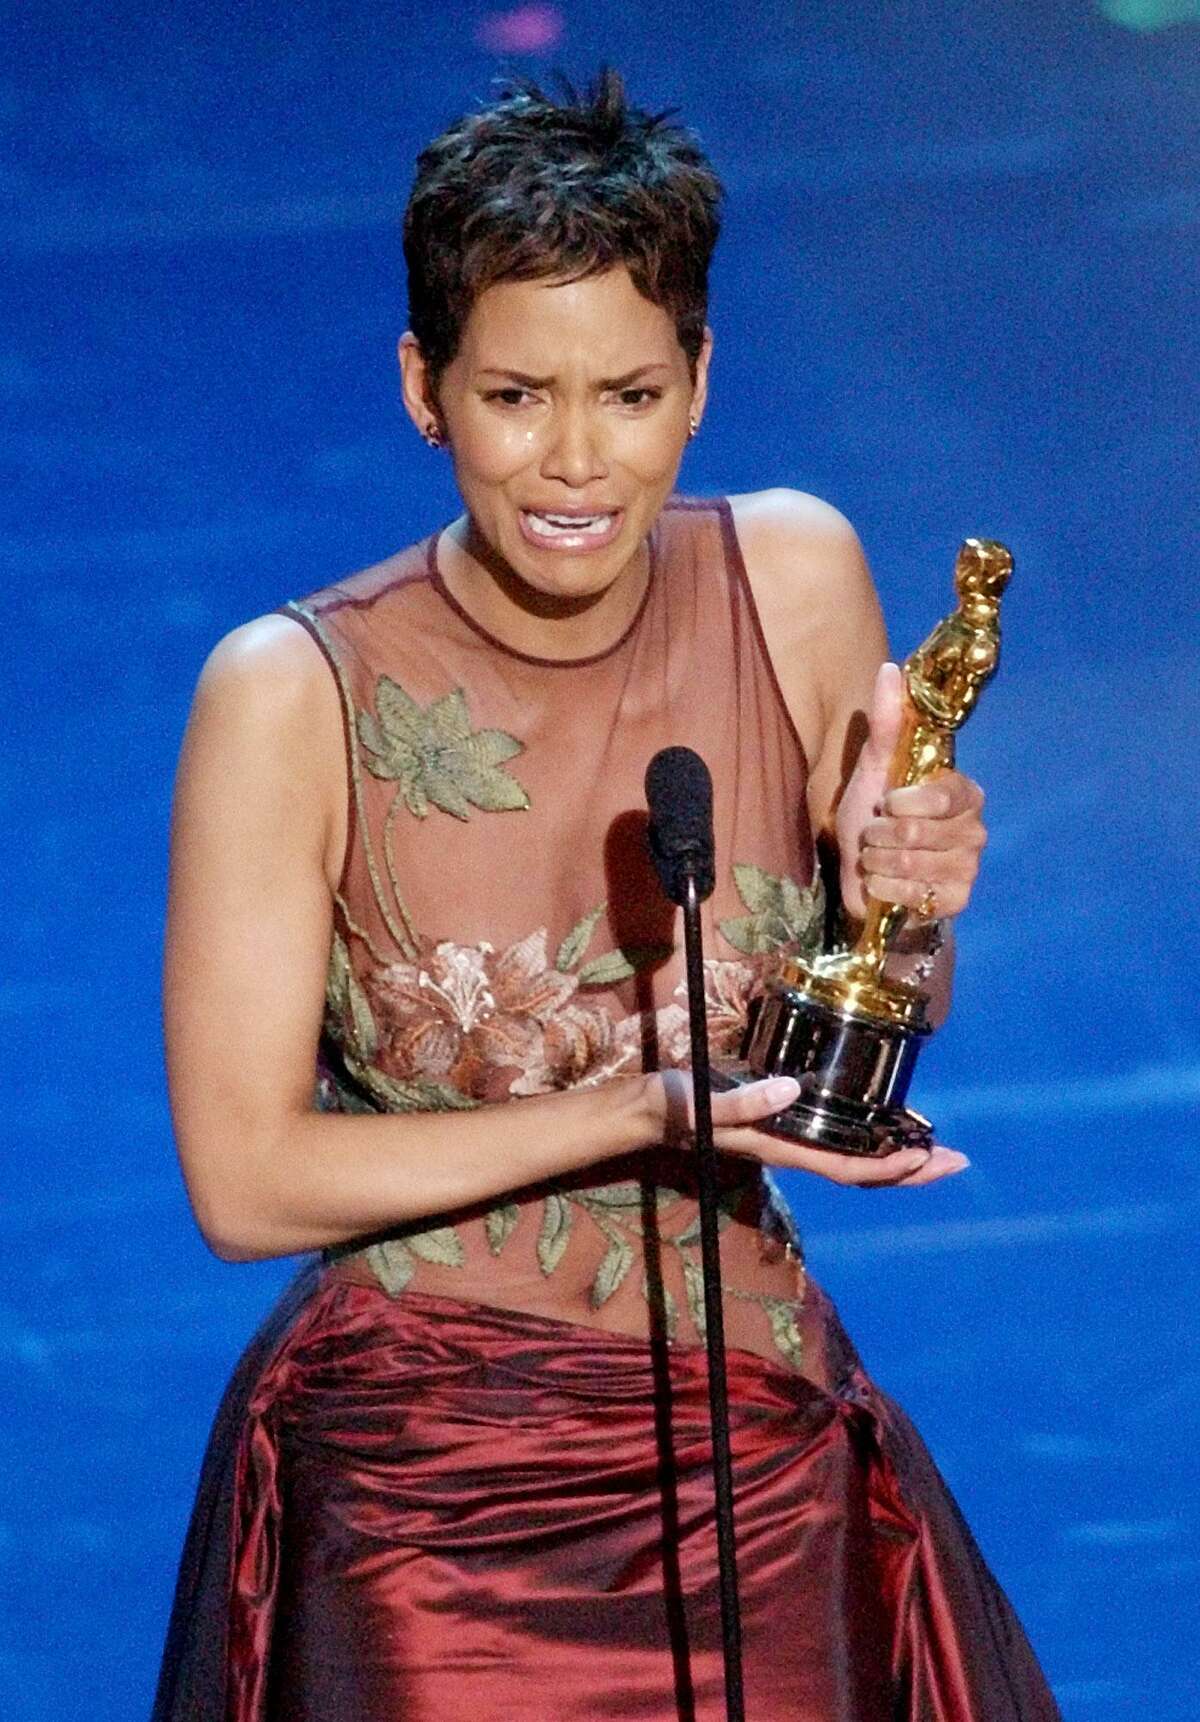 Halle Berry accepts her Oscar for best actress for her role in Monster’s Ball in 2002. She is the last African American woman to win the award, reflecting the need for new standards.